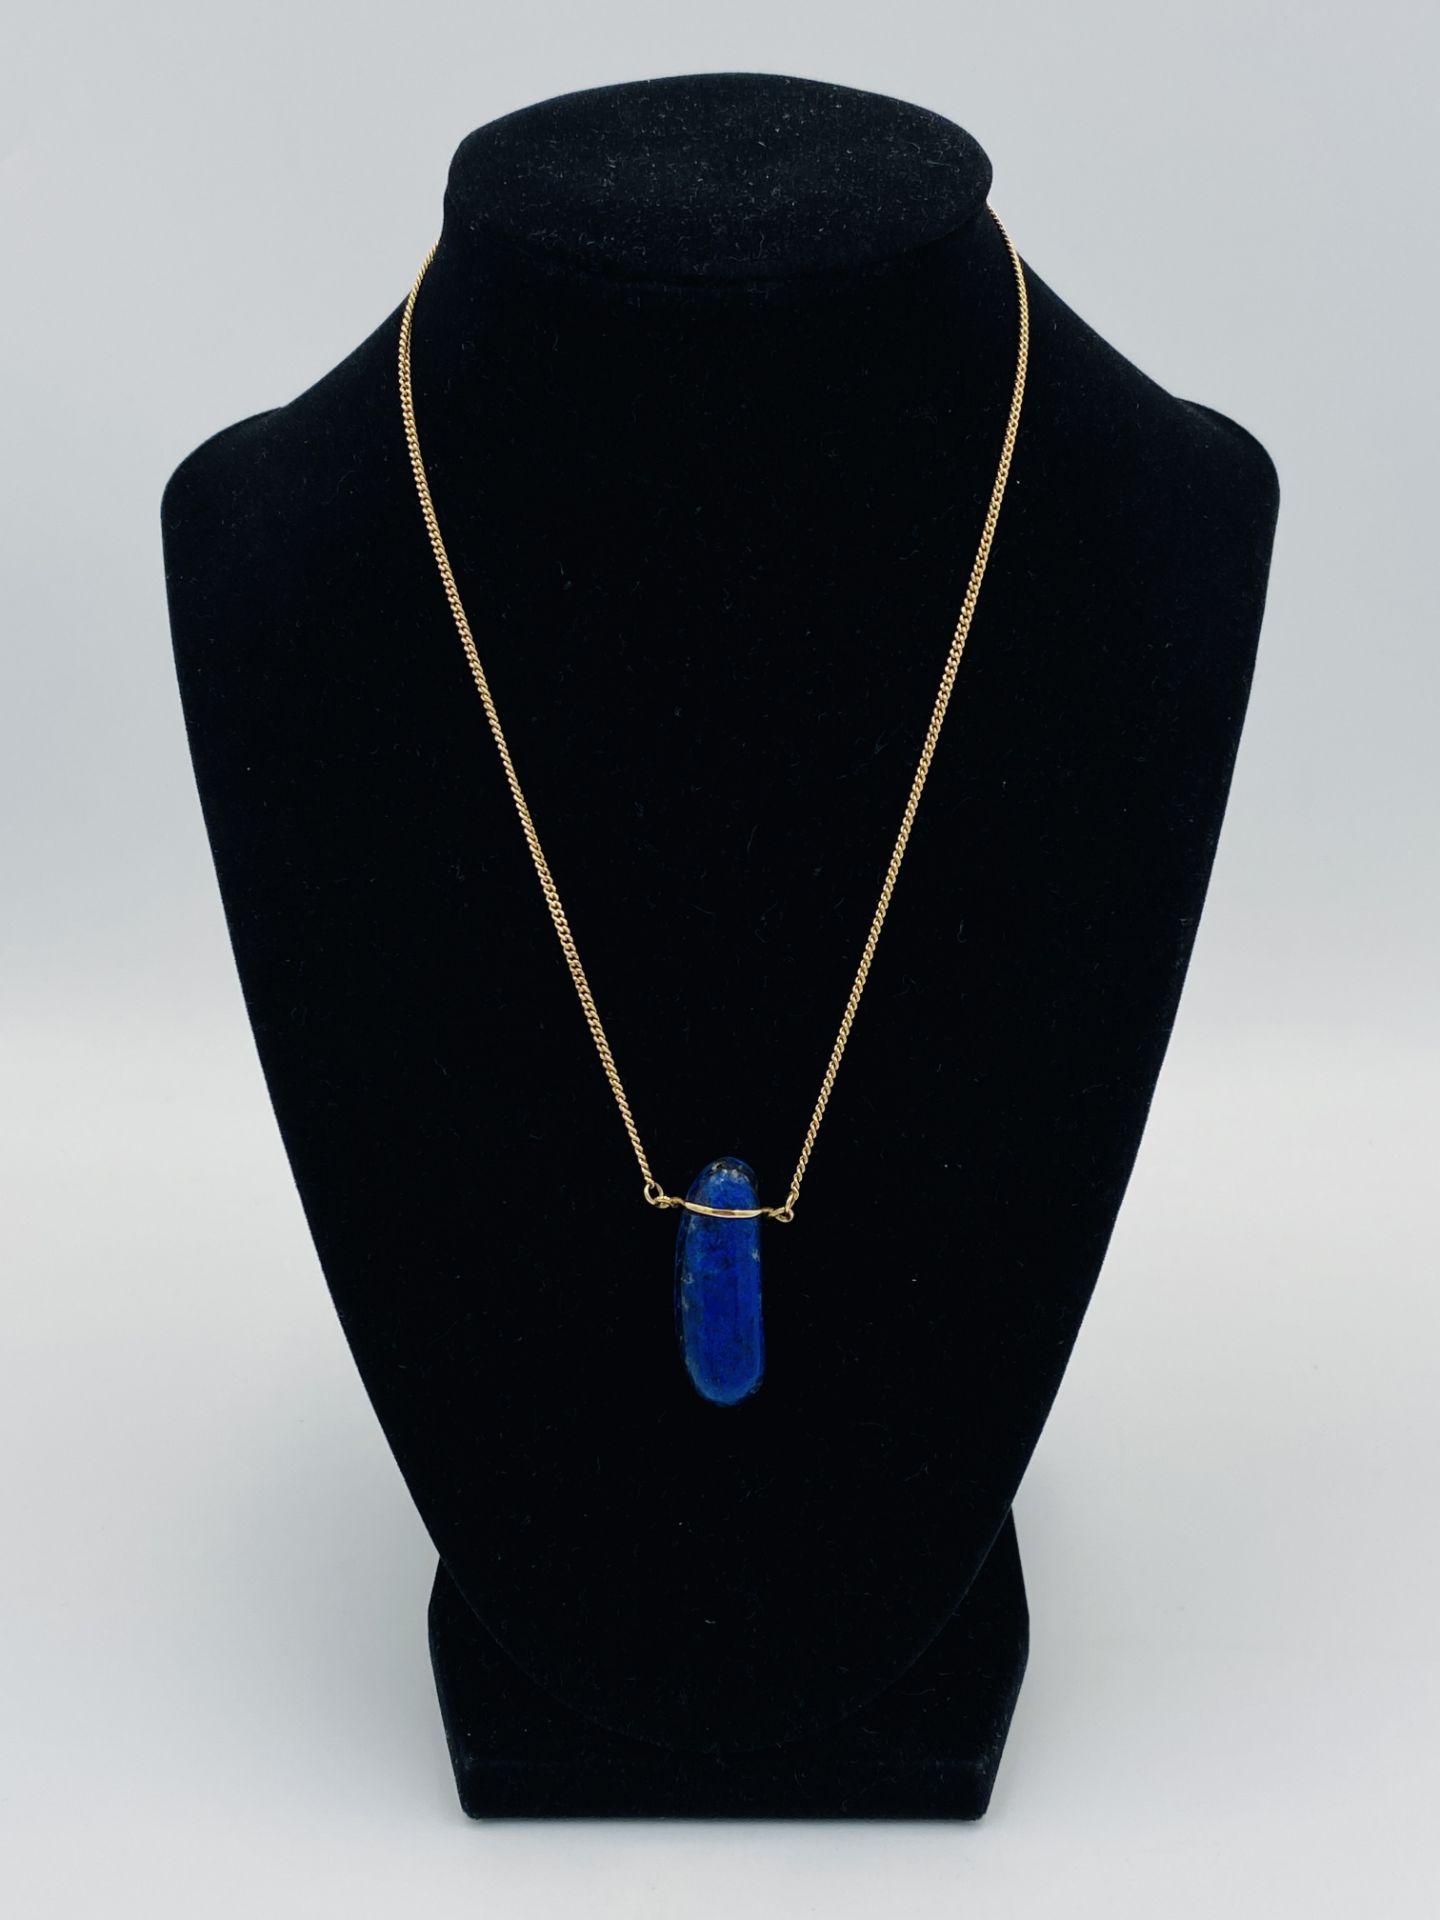 9ct gold necklace with a lapis pendant - Image 3 of 5